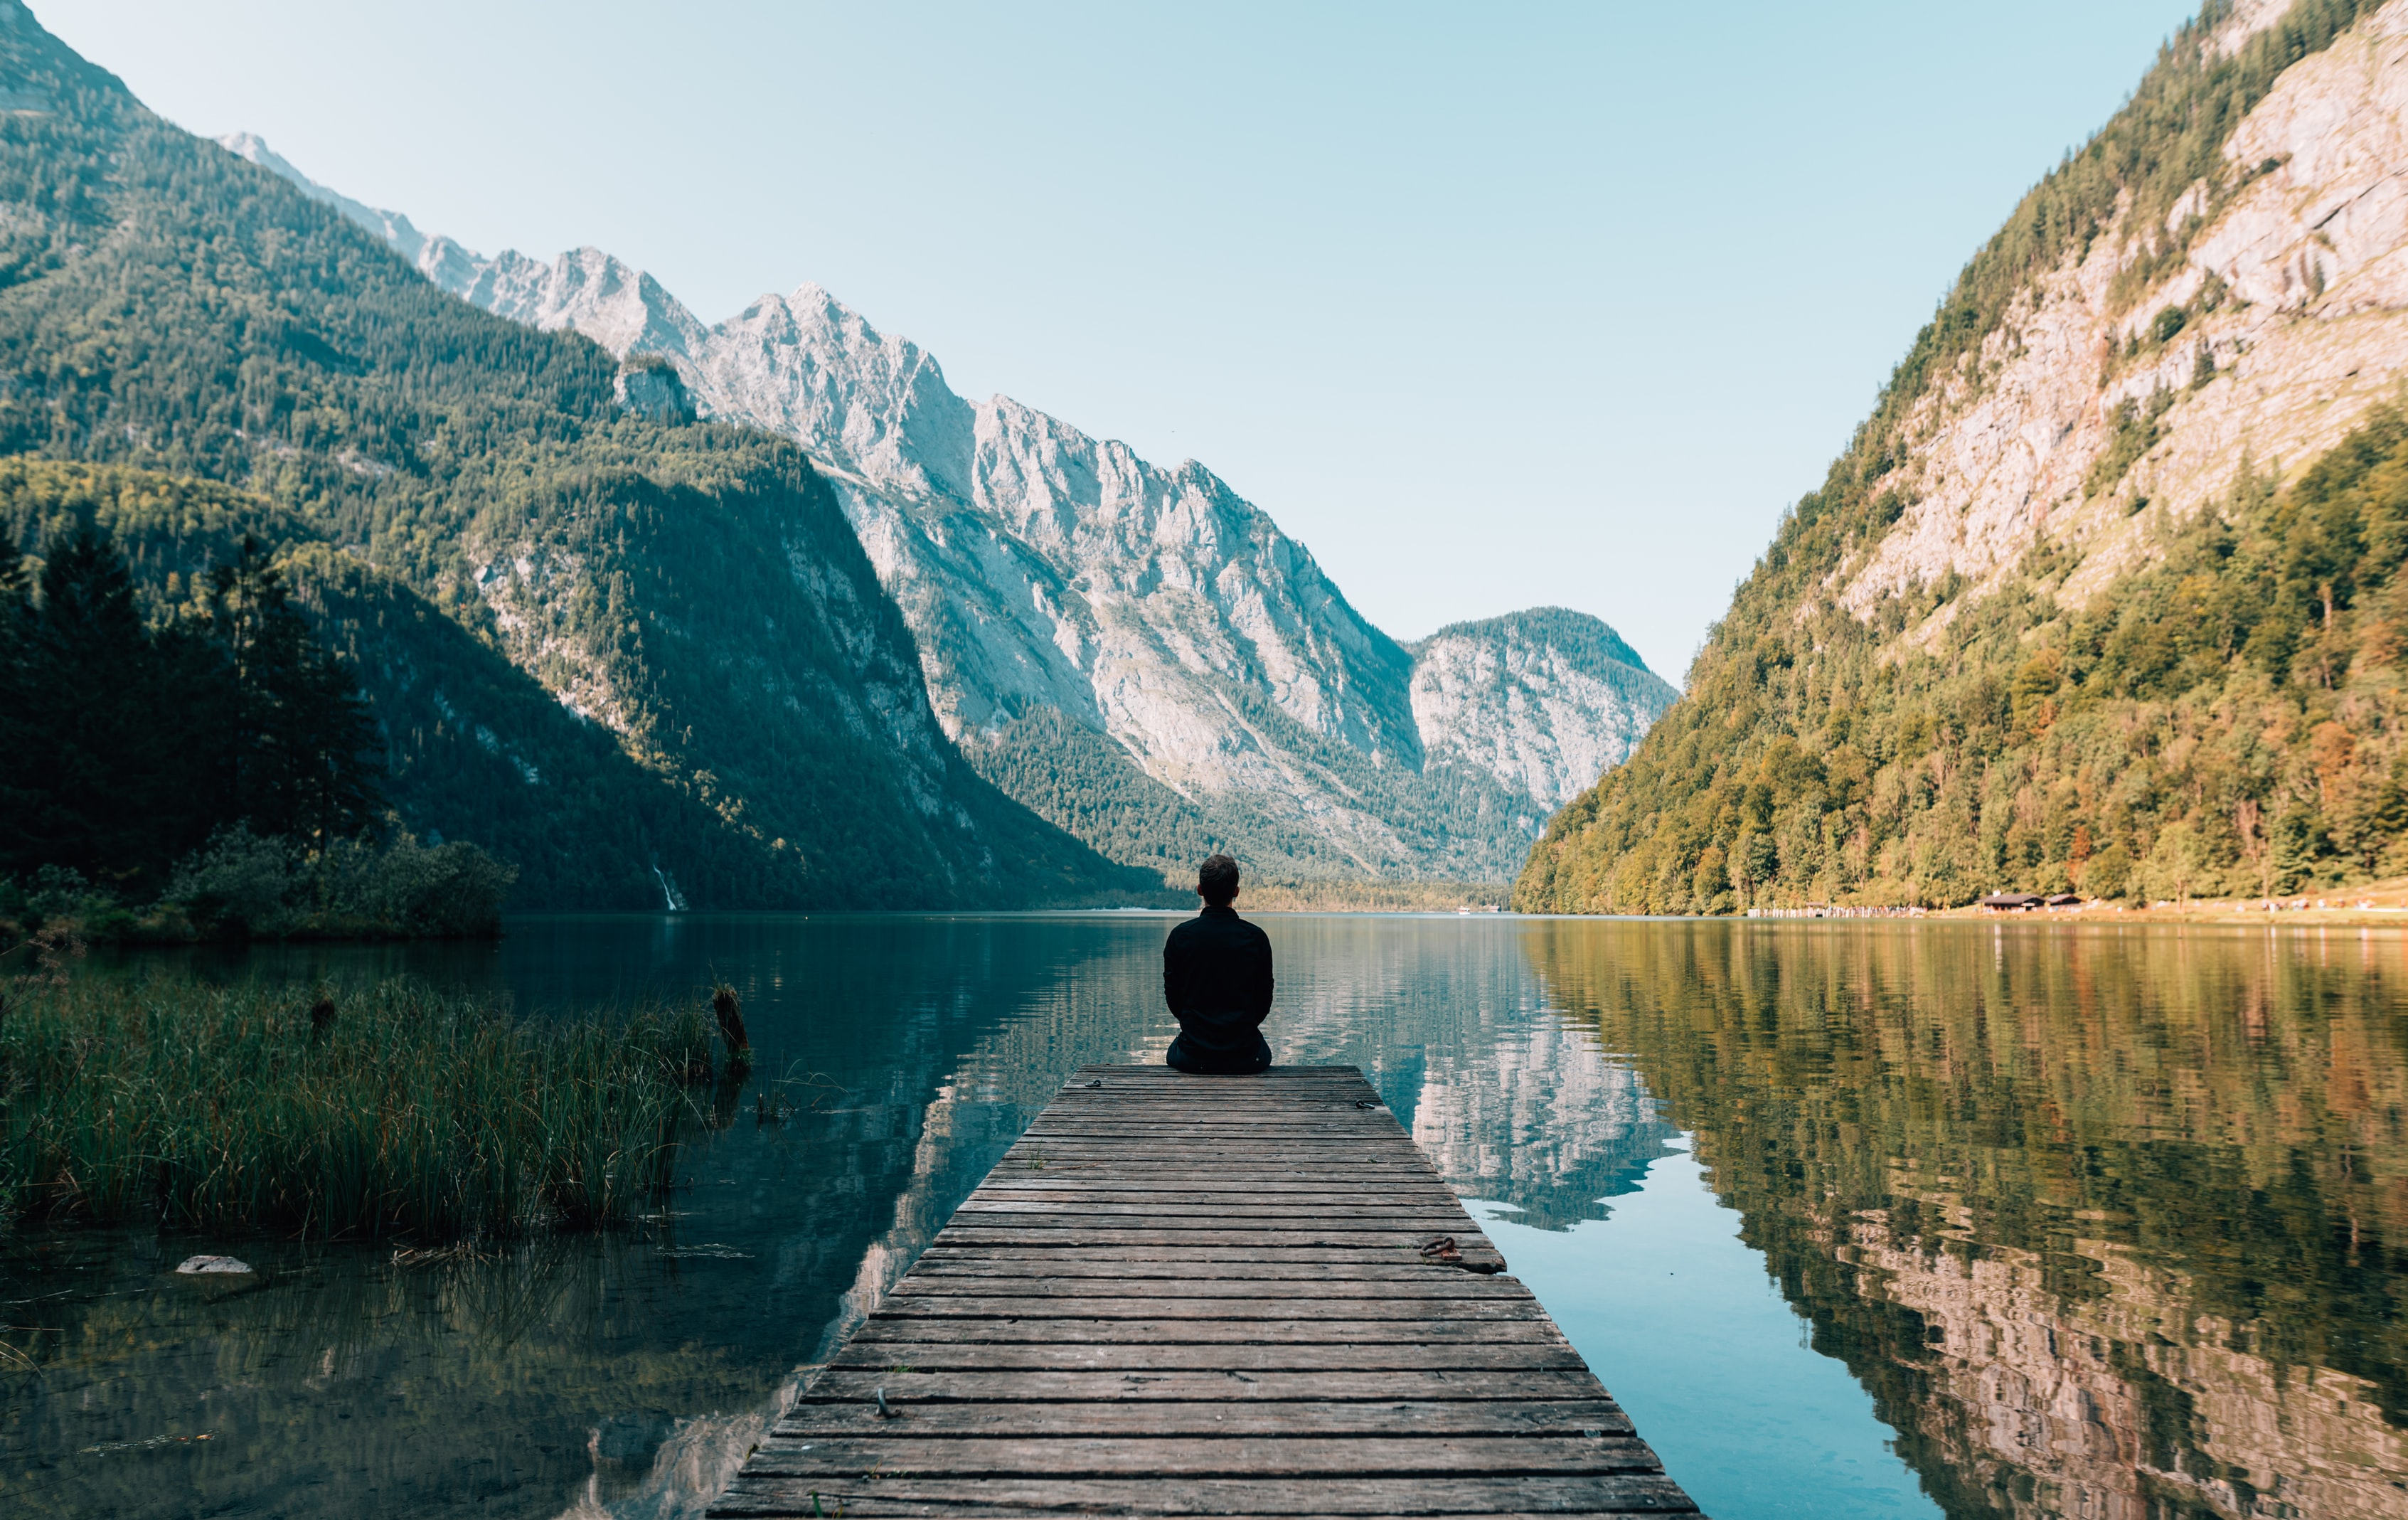 A person sitting on a dock in front of a beautiful landscape